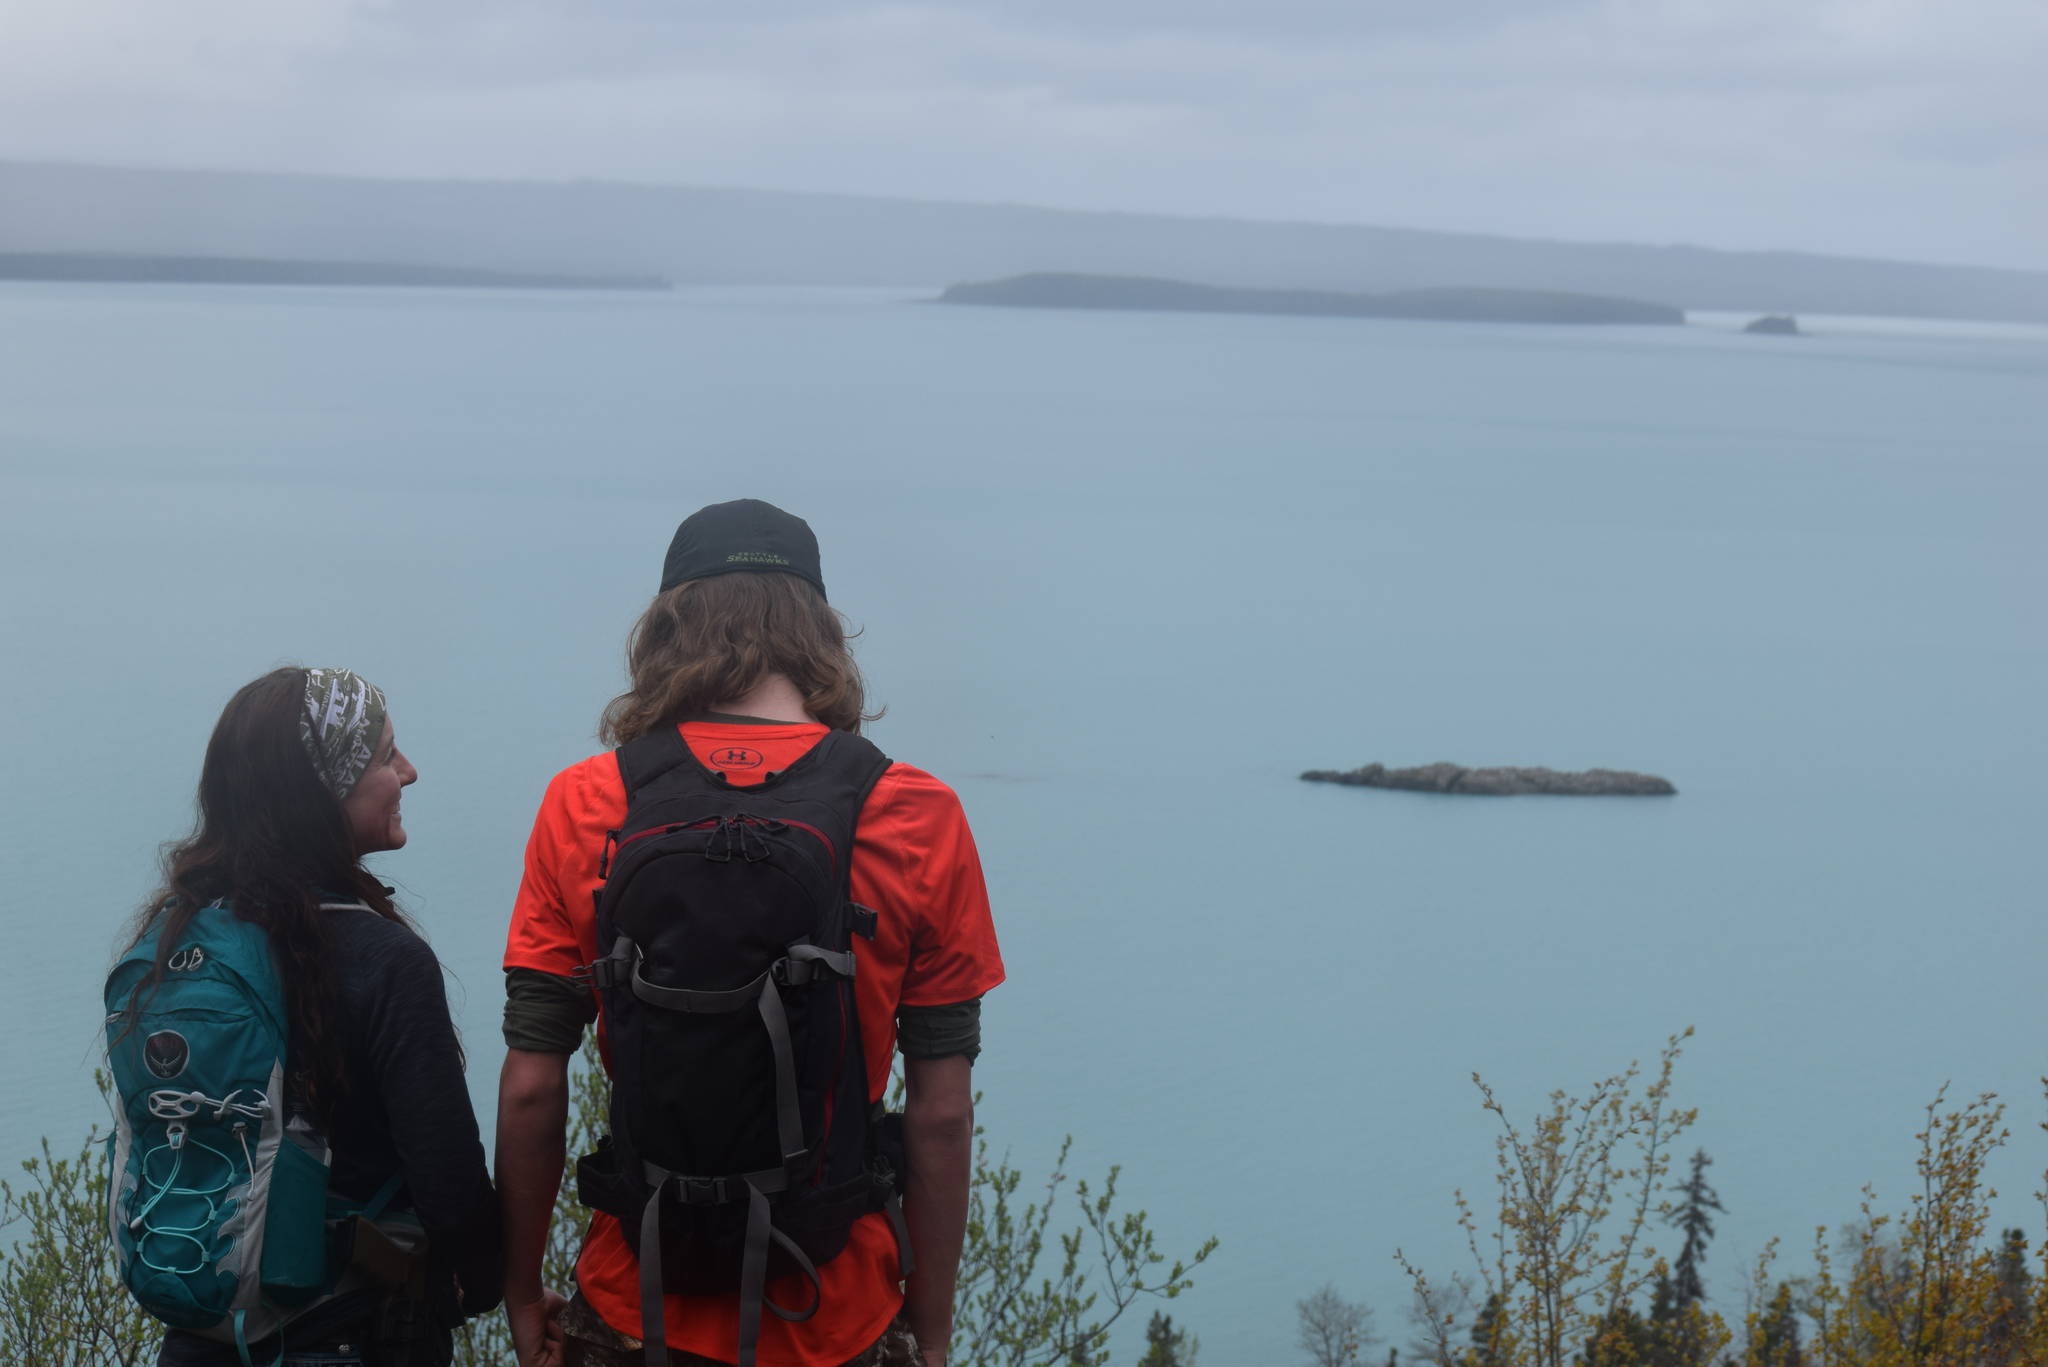 Tiffany Brand and her son look out over Skilak Lake while hiking the Vista Trail in Alaska on Saturday, May 11, 2019. (Photo by Brian Mazurek/Peninsula Clarion)